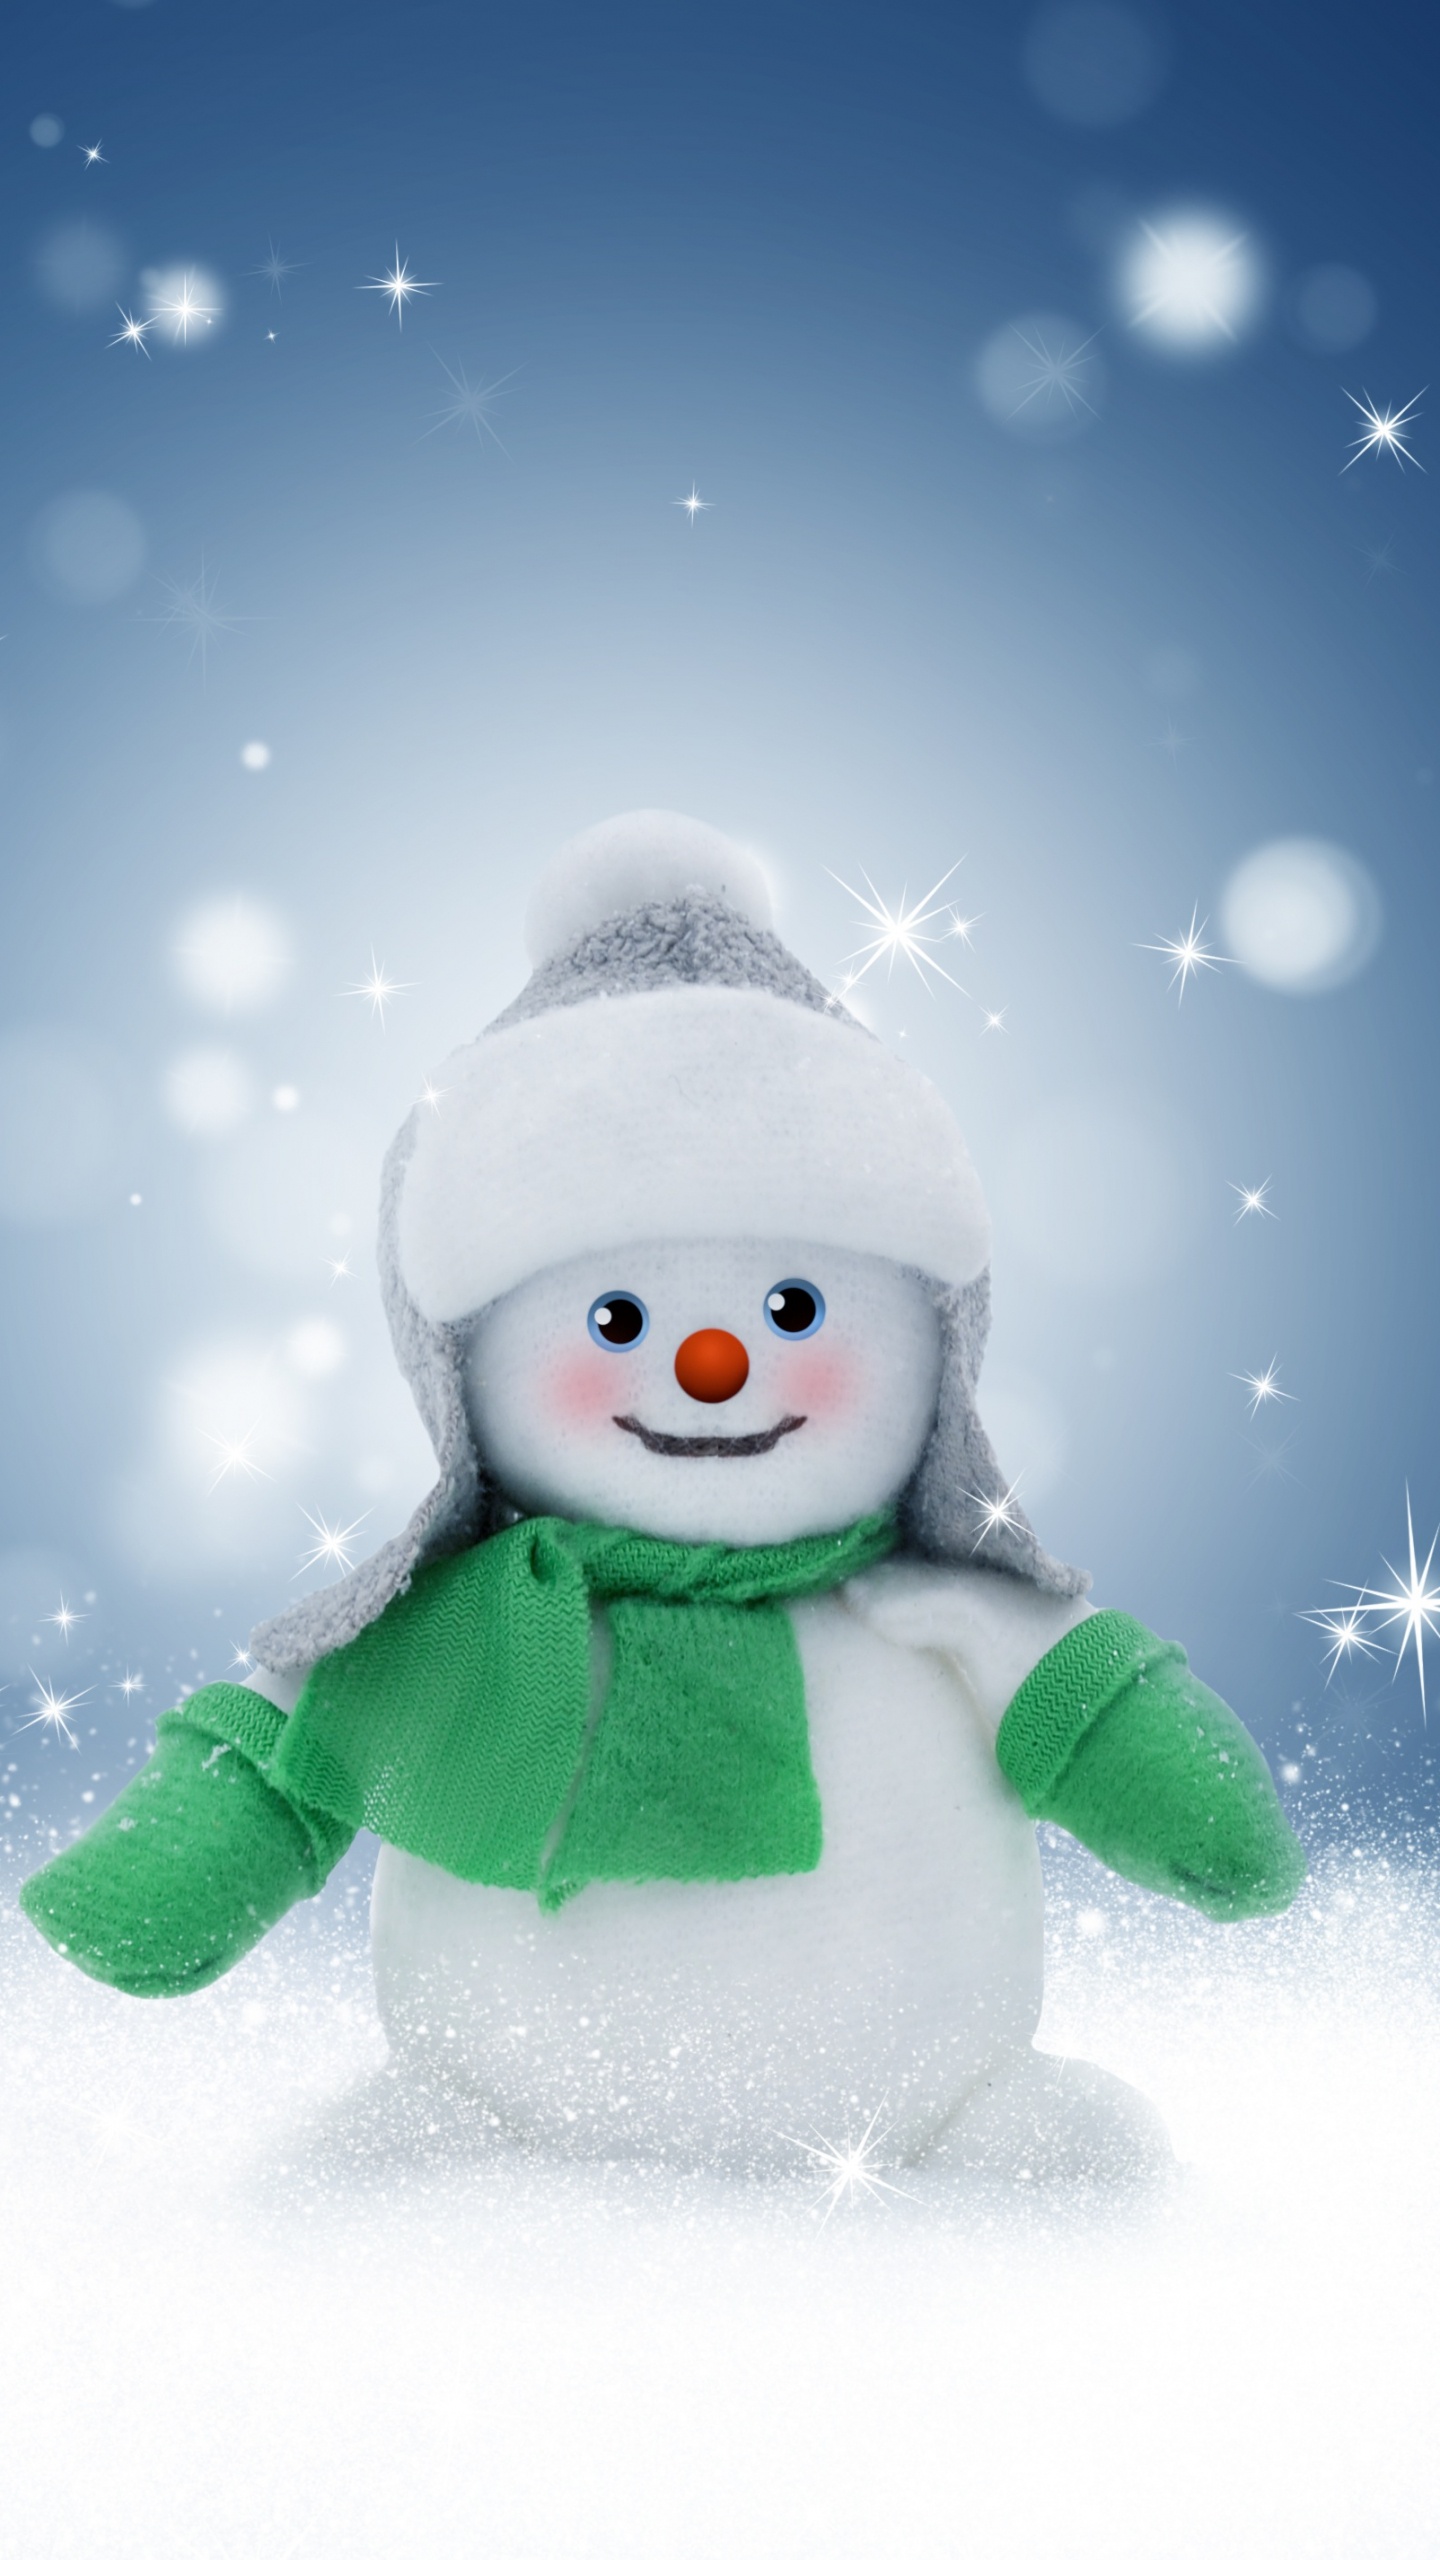 Christmas Day, Snow, Winter, Snowman, Playing in The Snow. Wallpaper in 1440x2560 Resolution